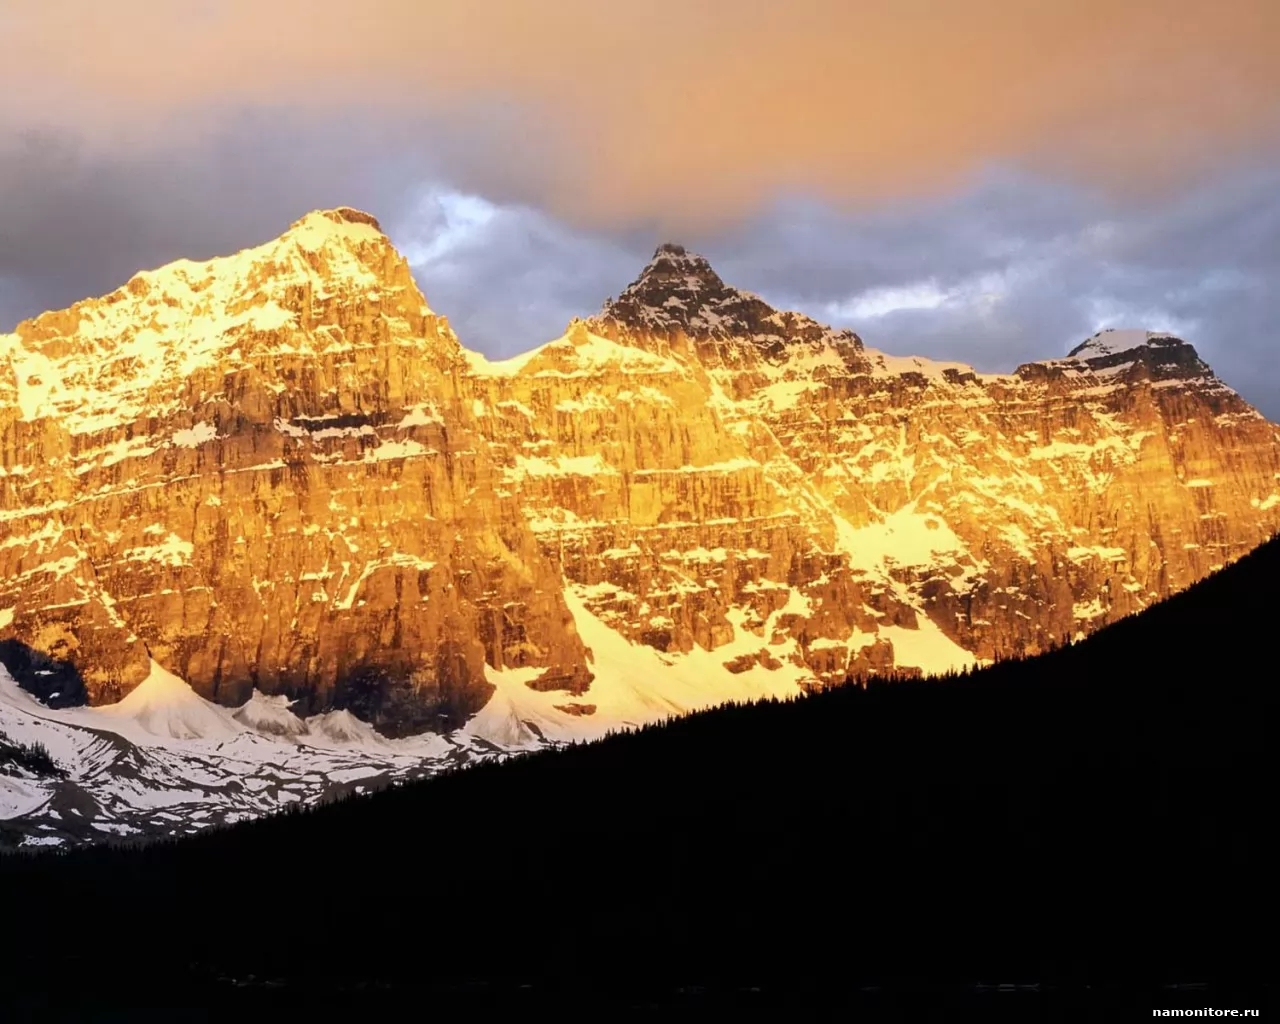 Mountains which have been lighted up by the sun, golden, landscapes, mountains, nature x